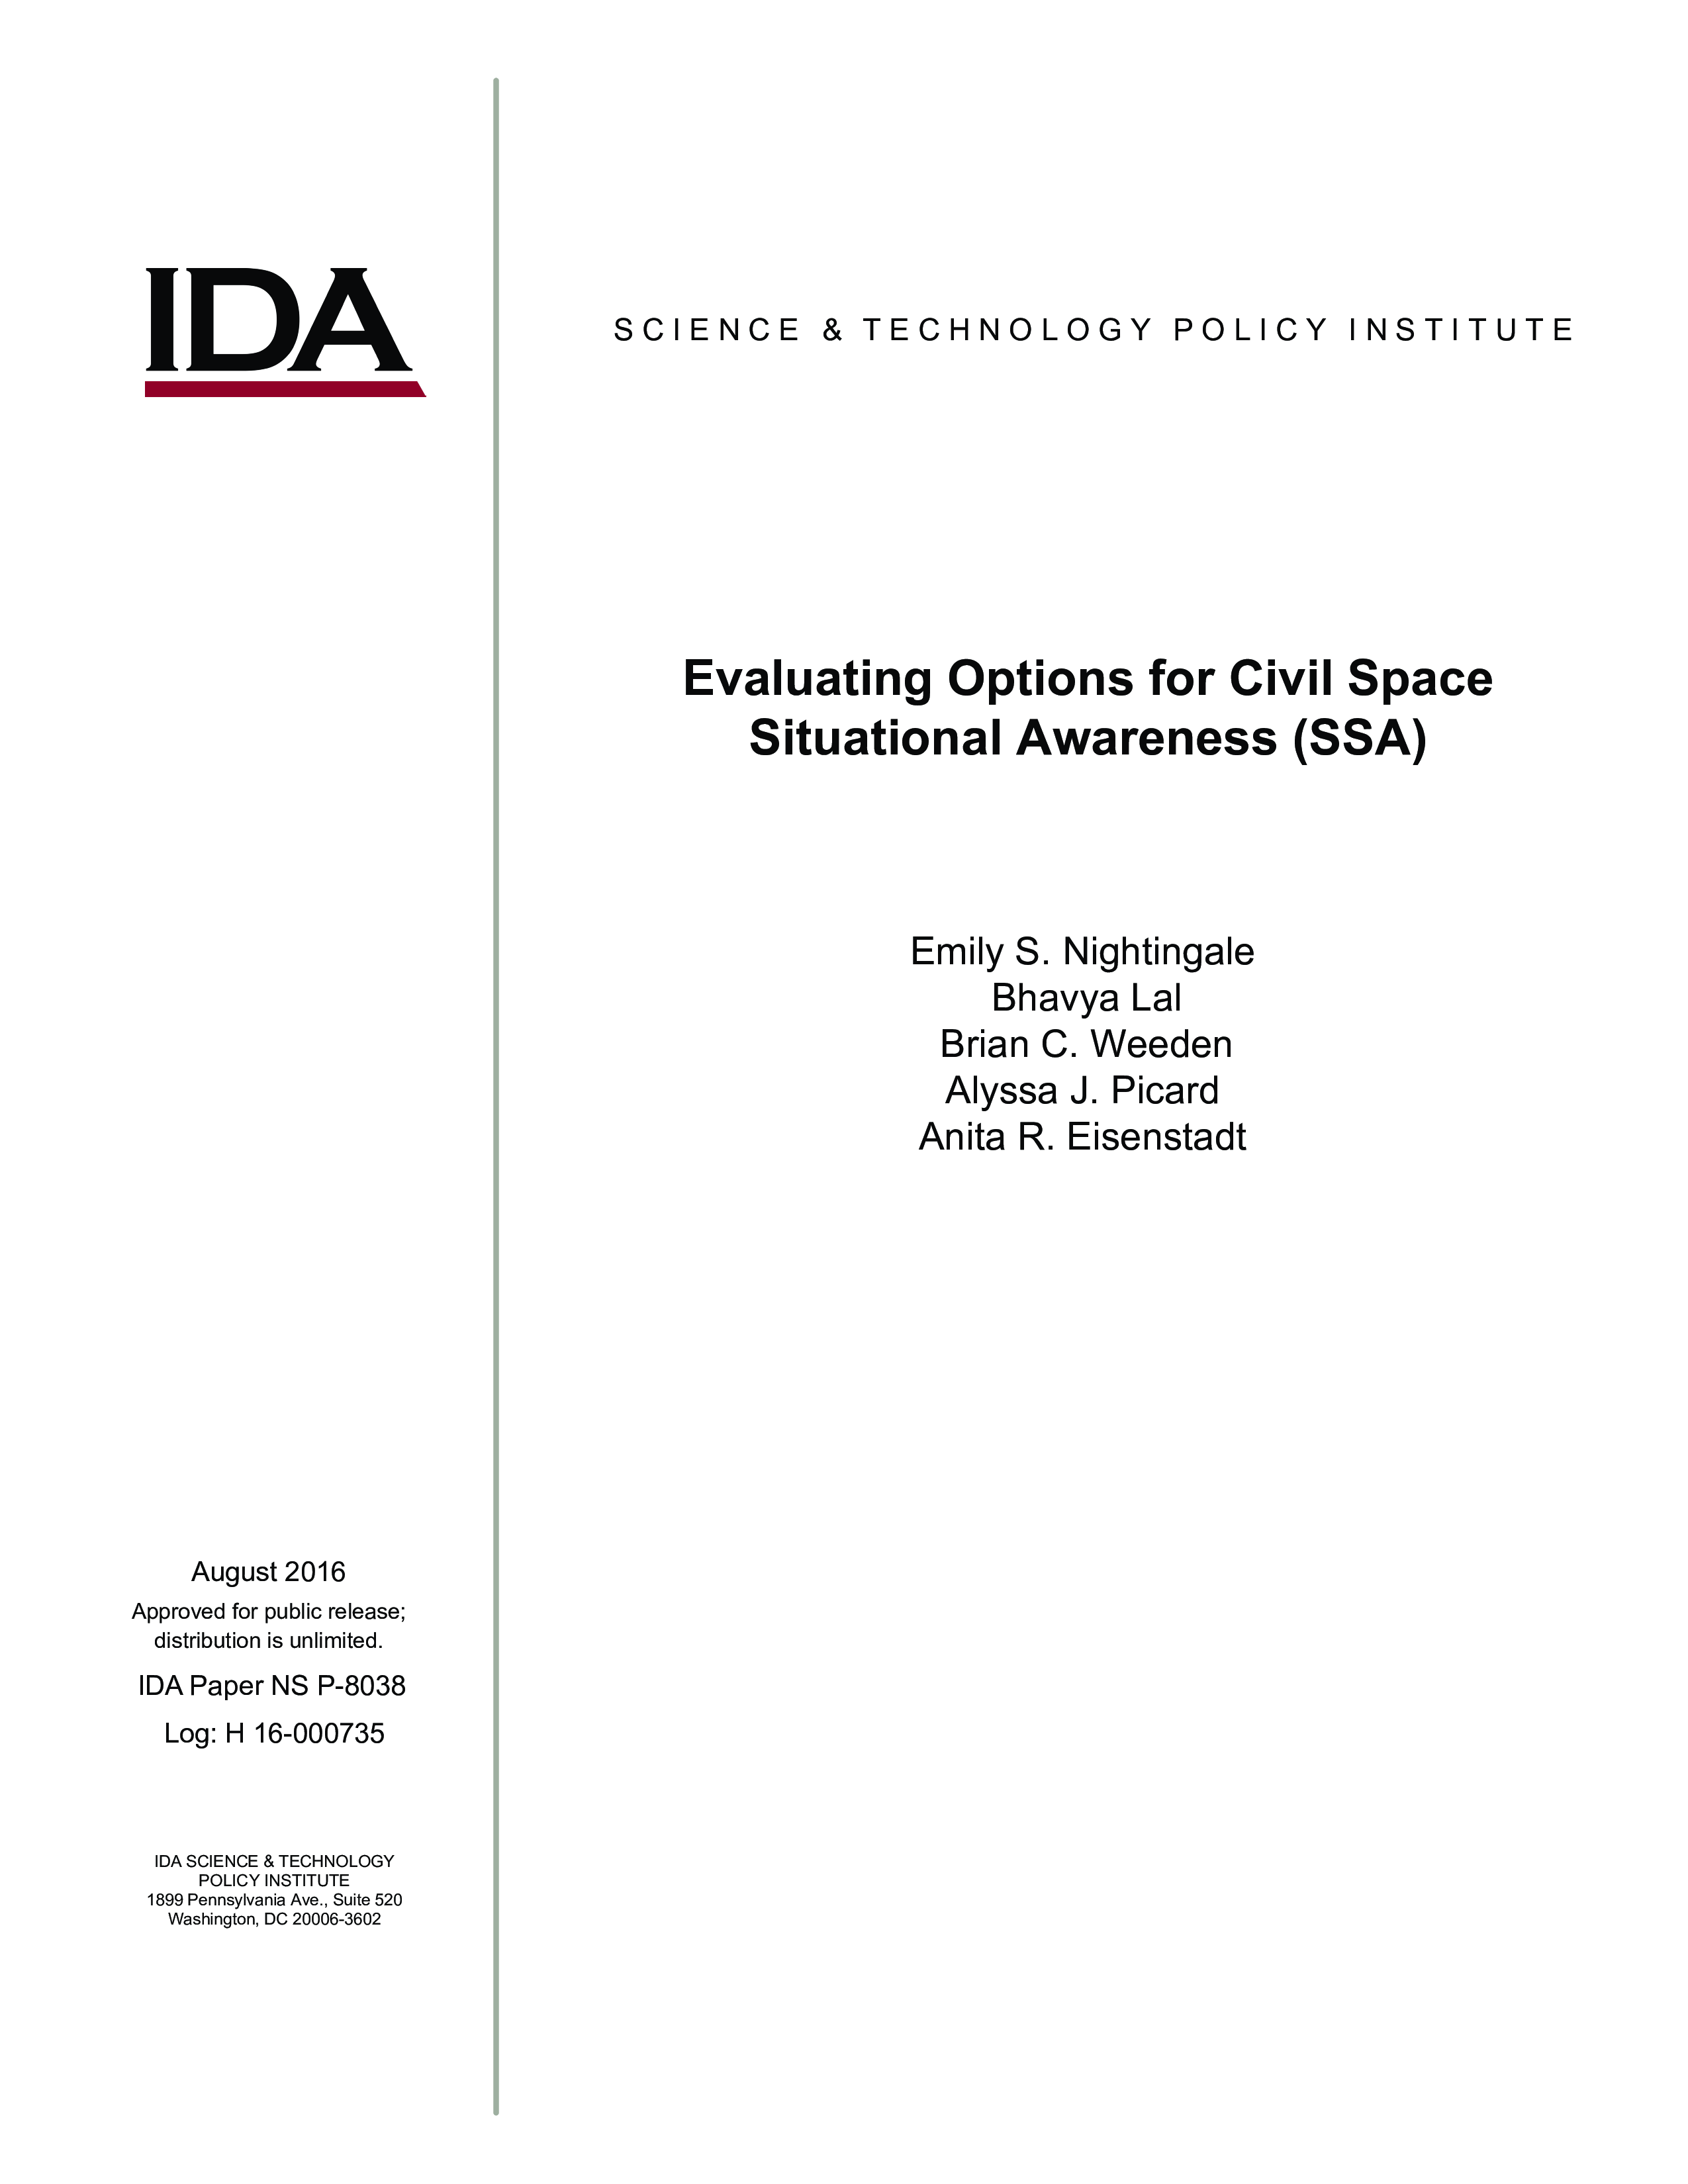 Evaluating Options for Civil Space Situational Awareness (SSA) 